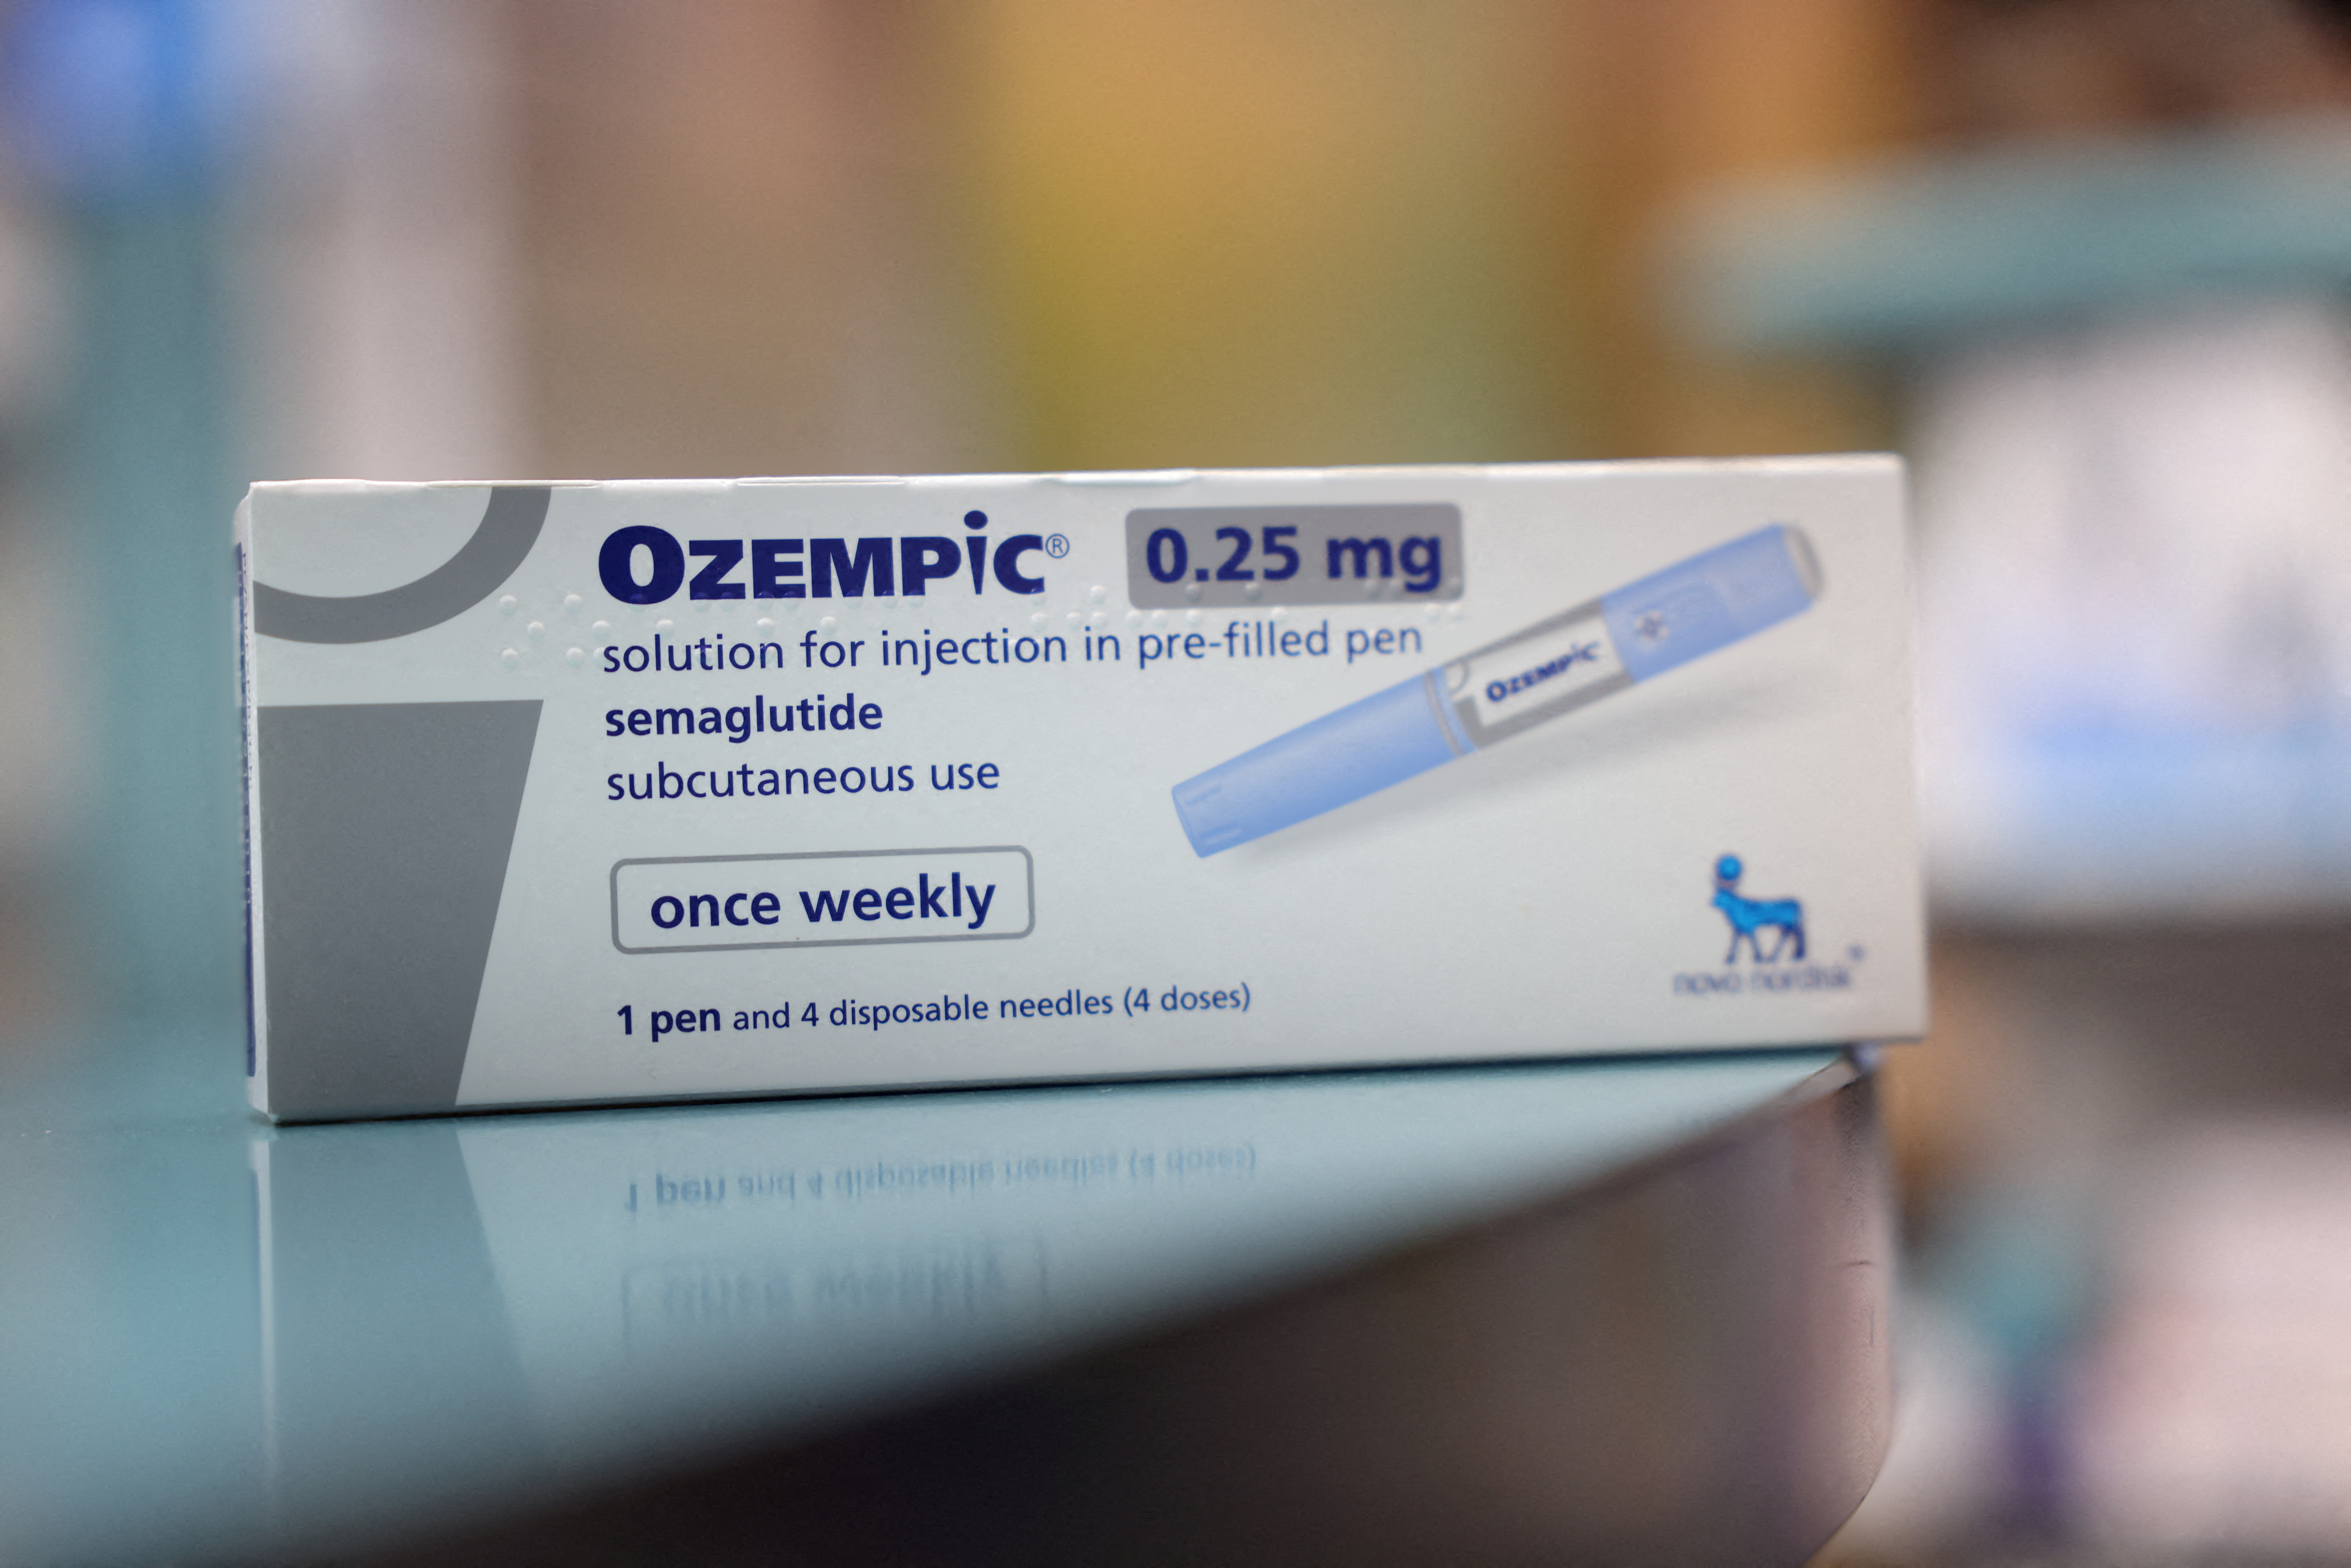 A box of Ozempic made by Novo Nordisk is seen at a pharmacy in London